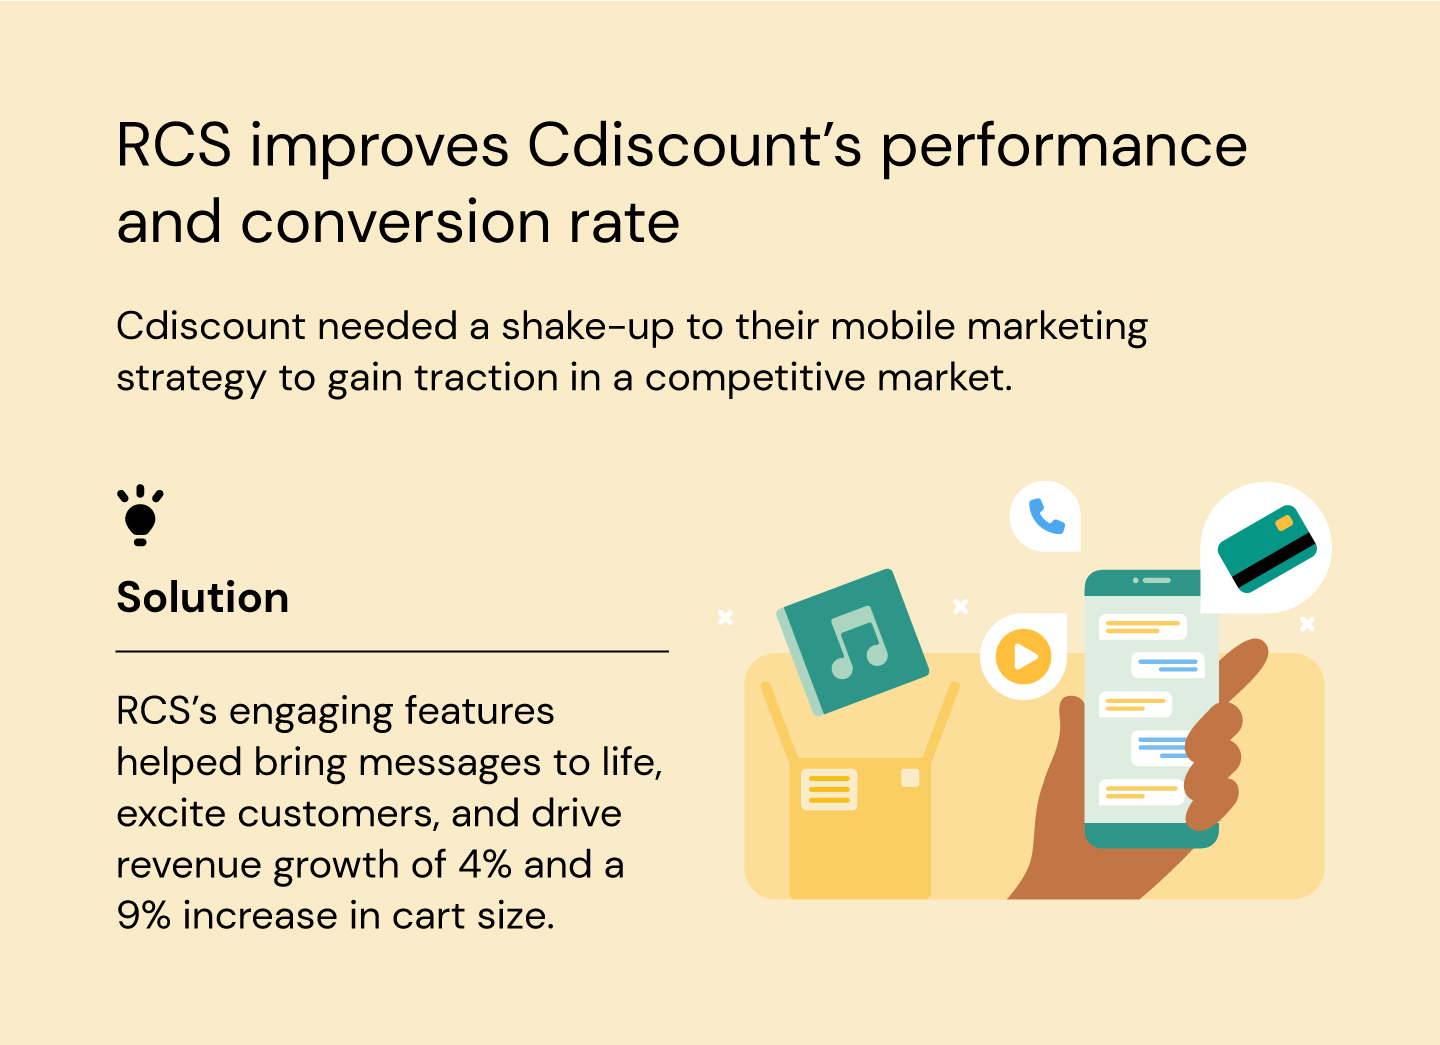 RCS helped Cdiscount increase performance and conversion rate